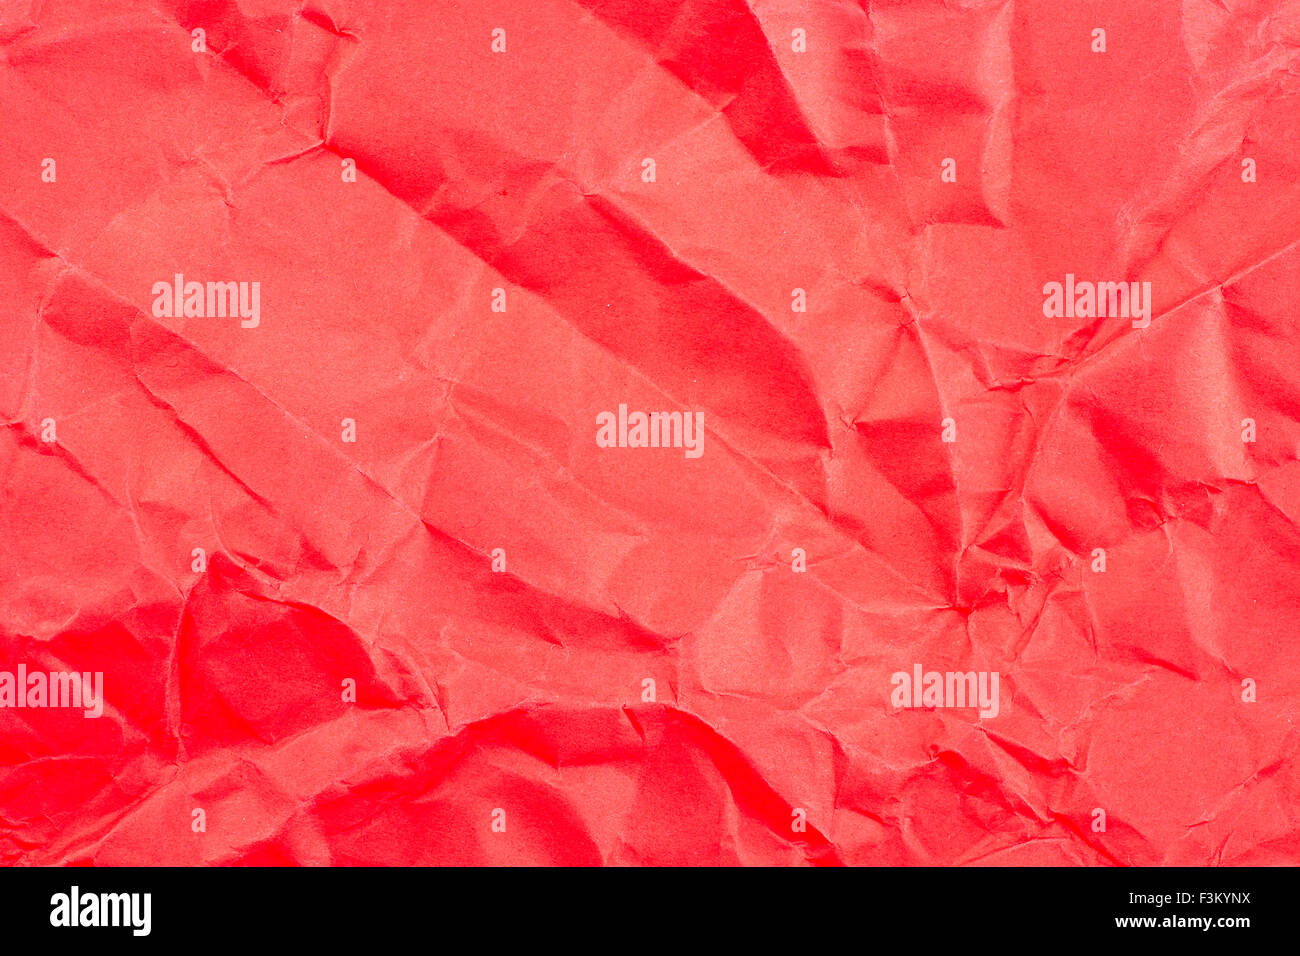 Red leathery background texture Stock Photo